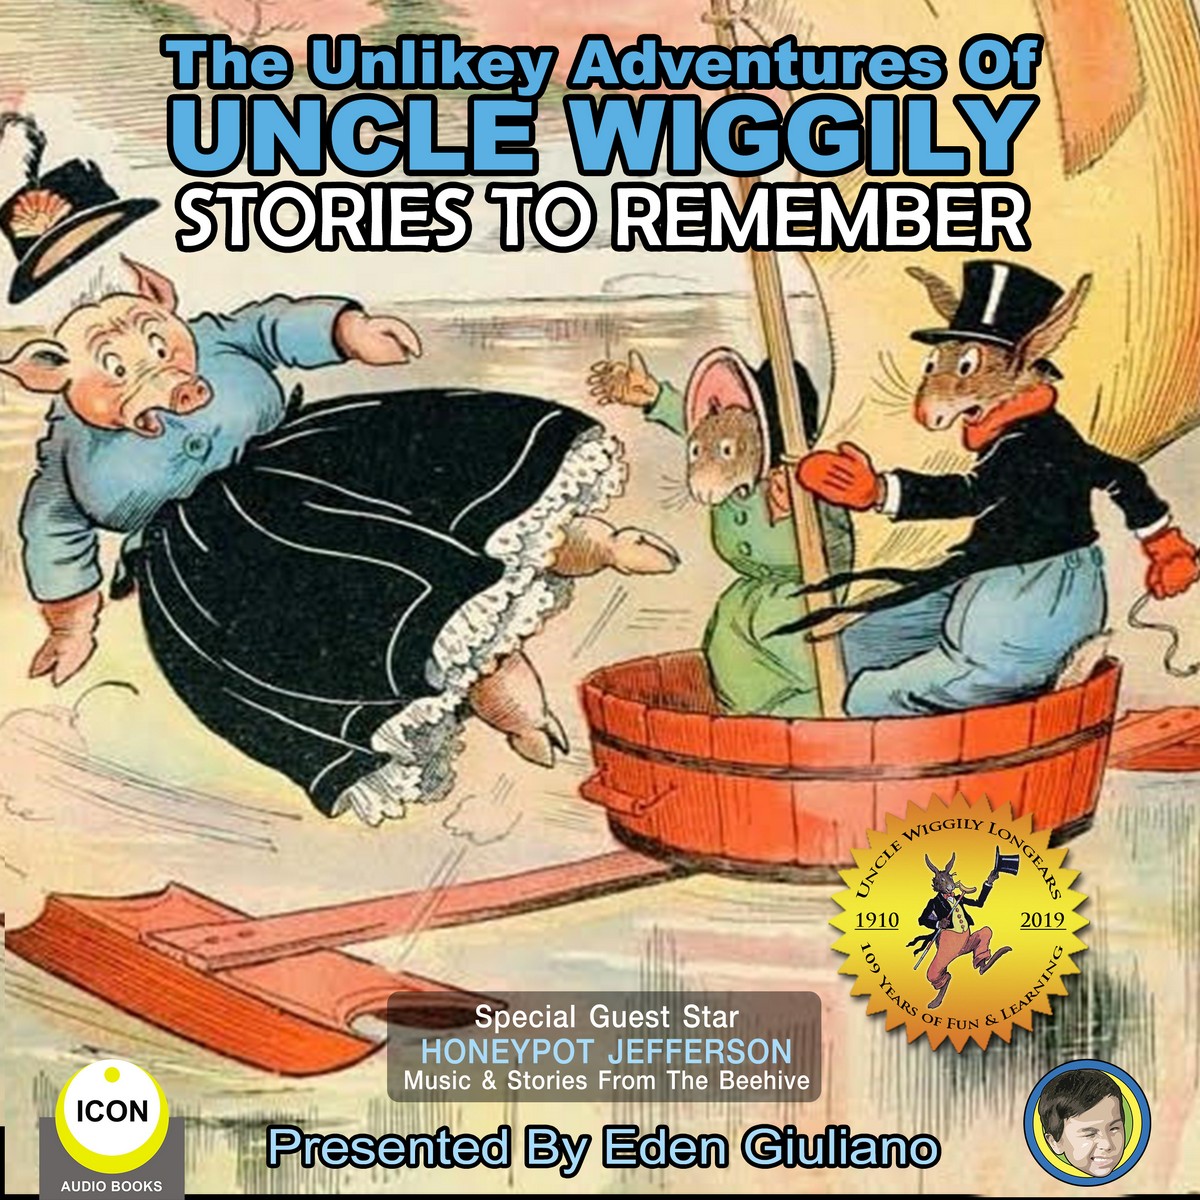 The Unlikely Adventures Of Uncle Wiggily – Stories To Remember